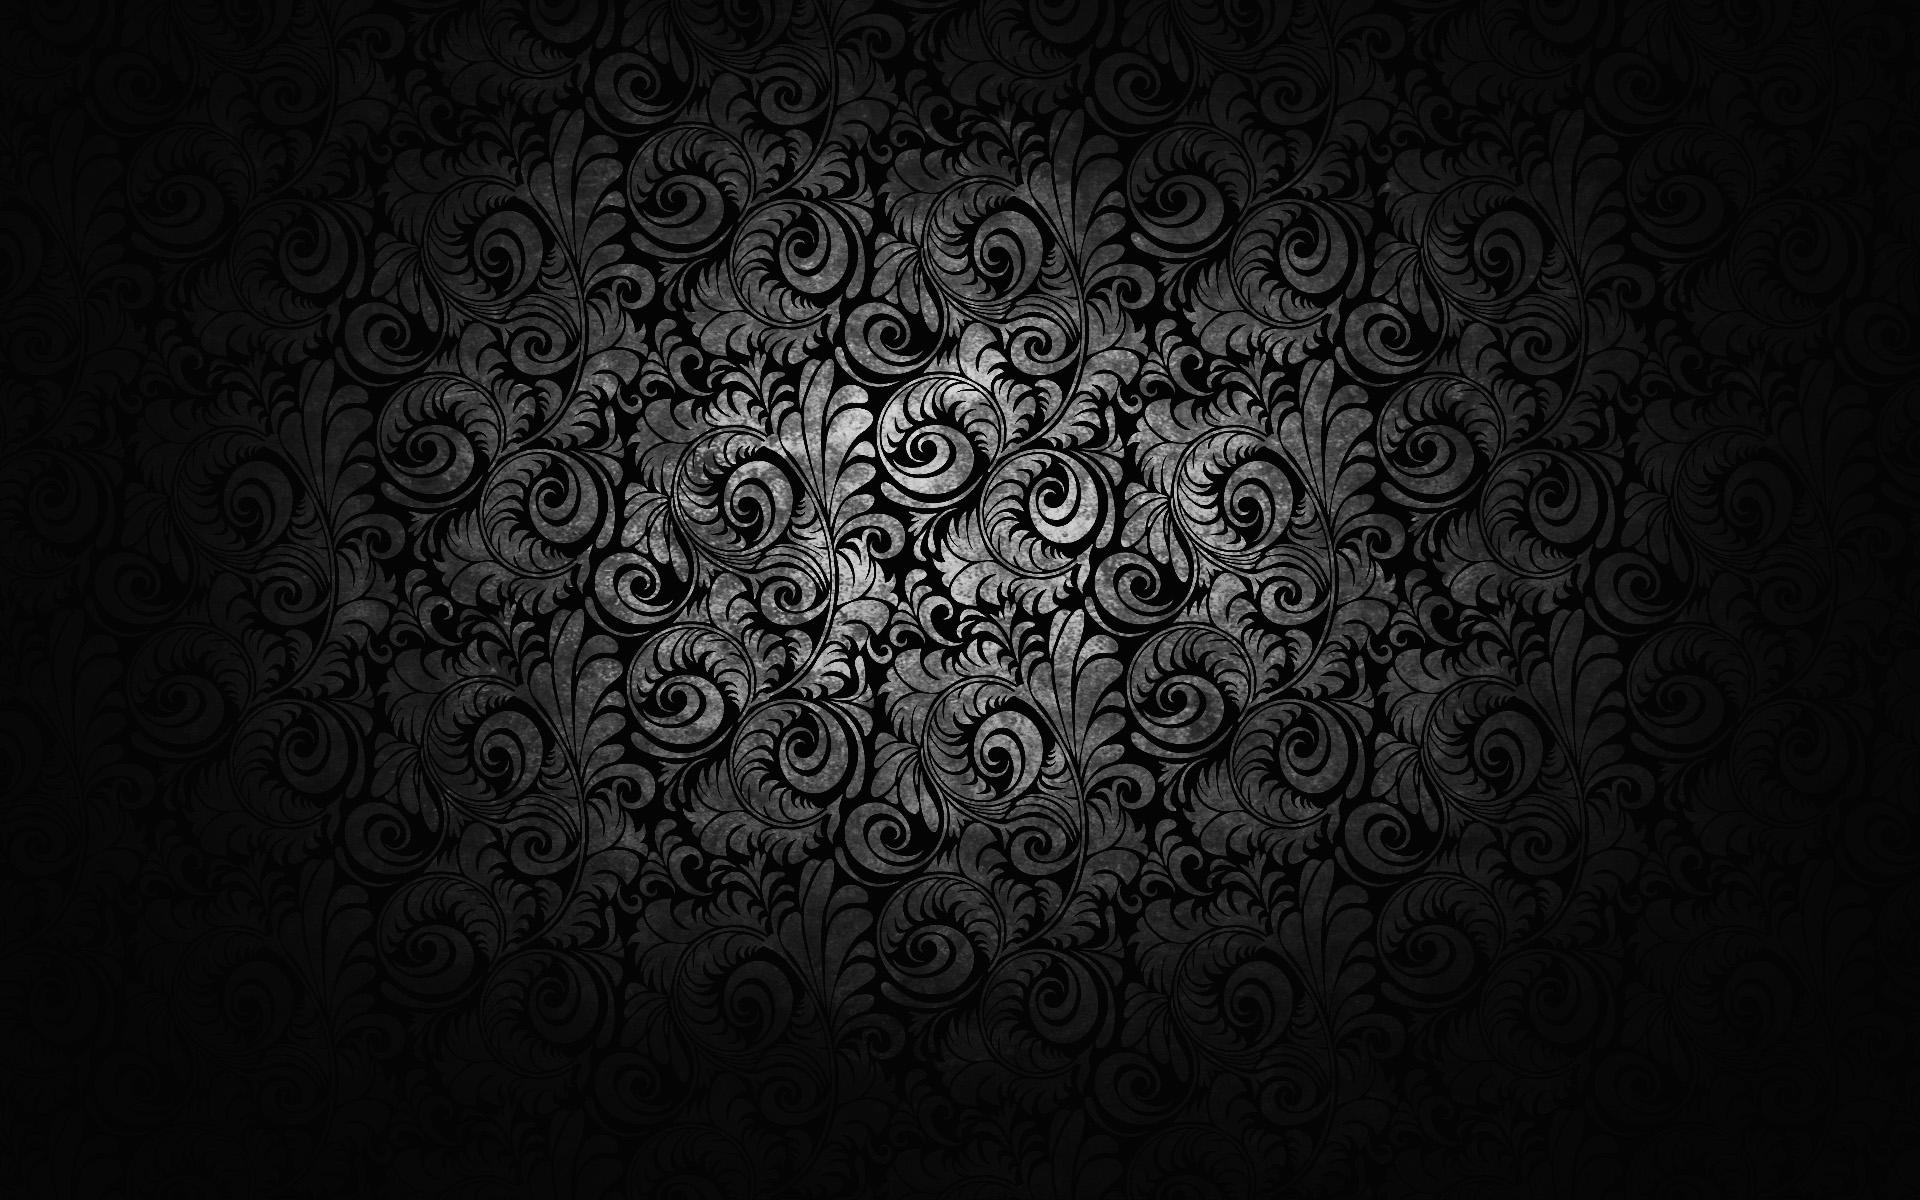 HD Black and White Floral Wallpaper and Photo. HD Abstract Wallpaper